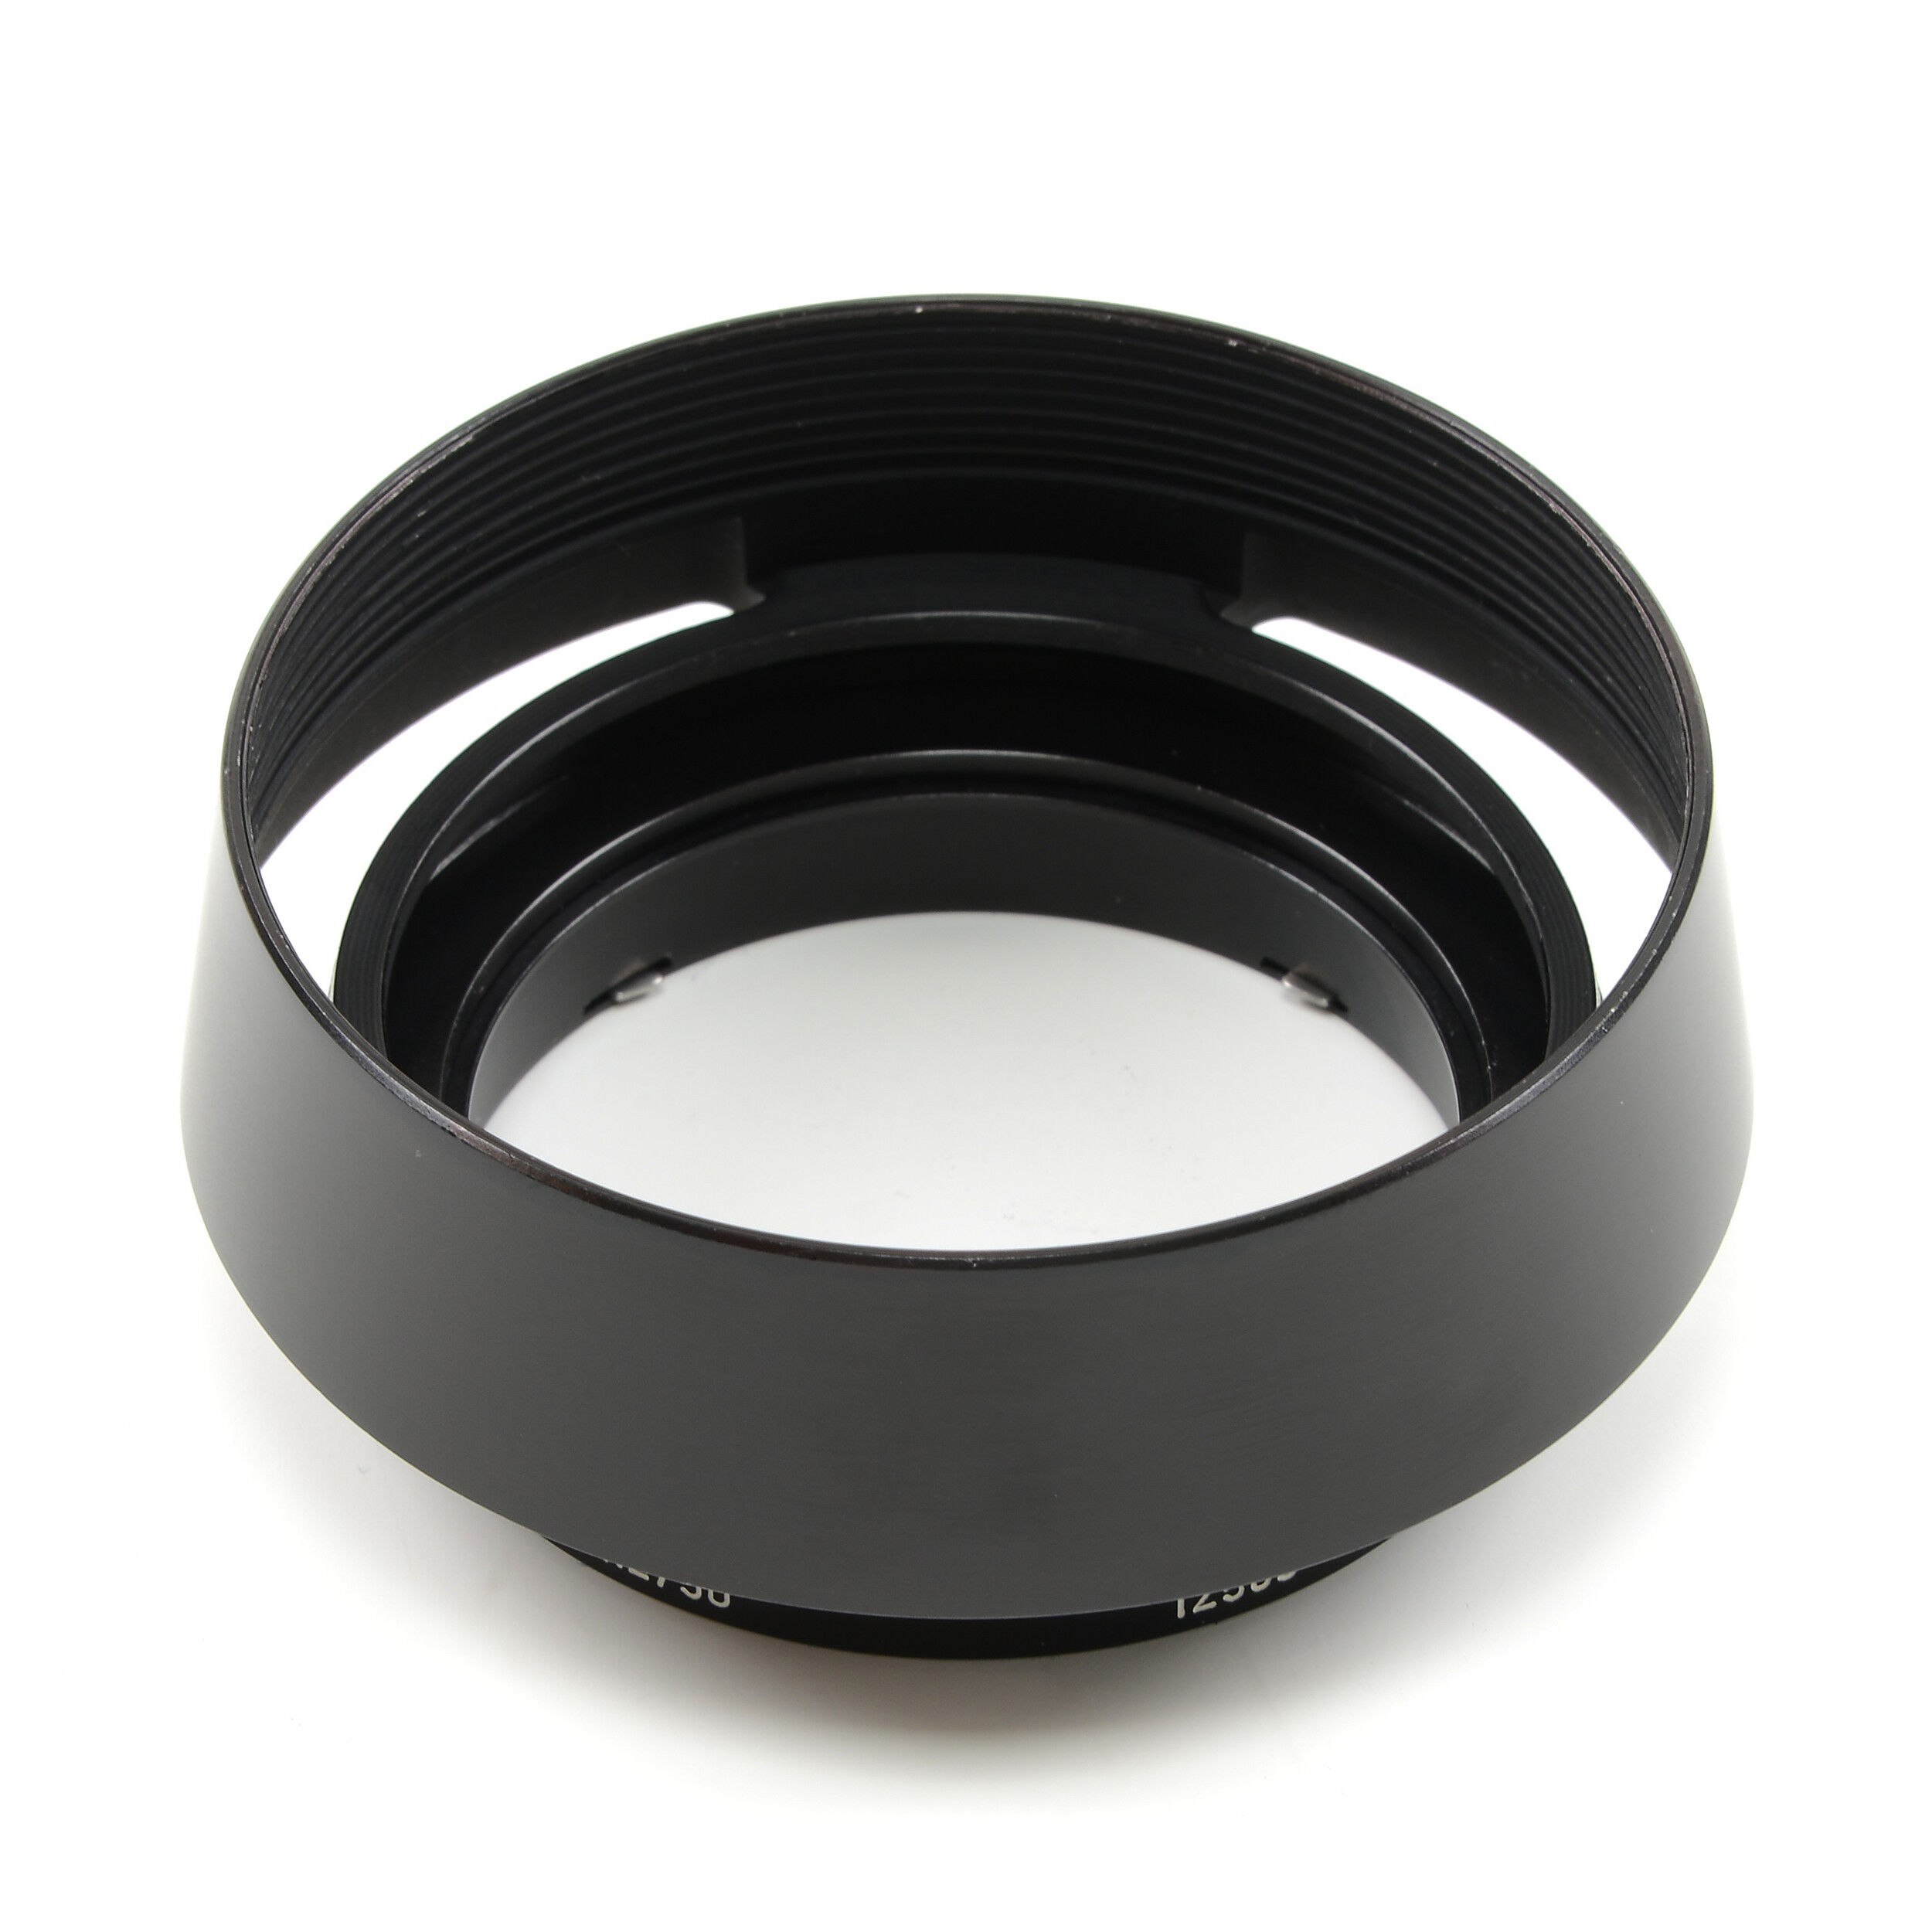 LEITZ 12503 LENS HOOD FOR NOCTILUX 50MM F1.2 VERY RARE 12503 #4438